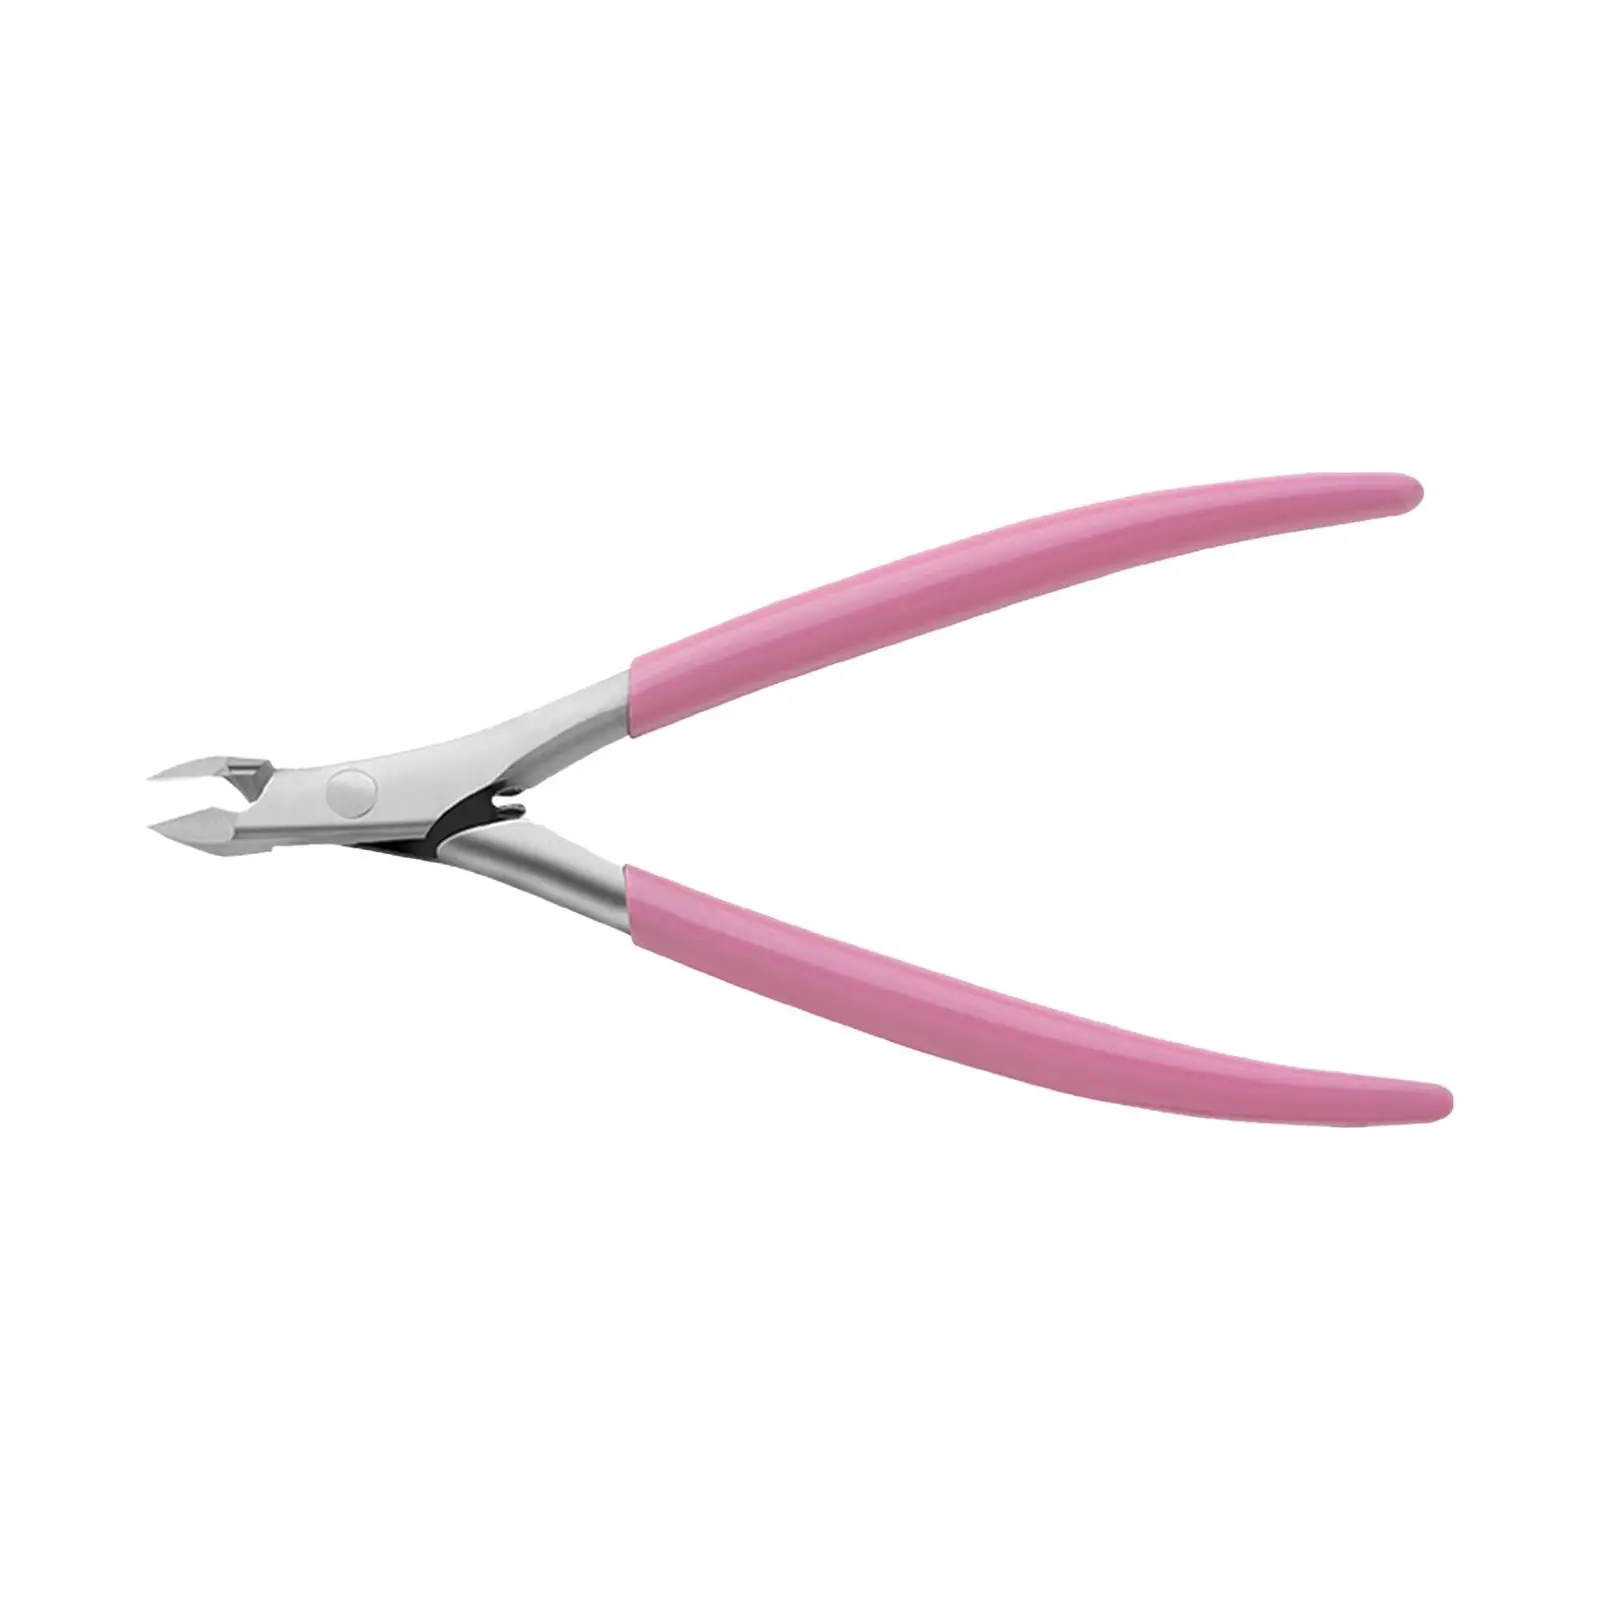 Stainless Steel Cuticle Trimmer Nippers Easy Grip Ingrown Toenail Clippers Pointed 5mm Jaw Callus Remover for Home SPA